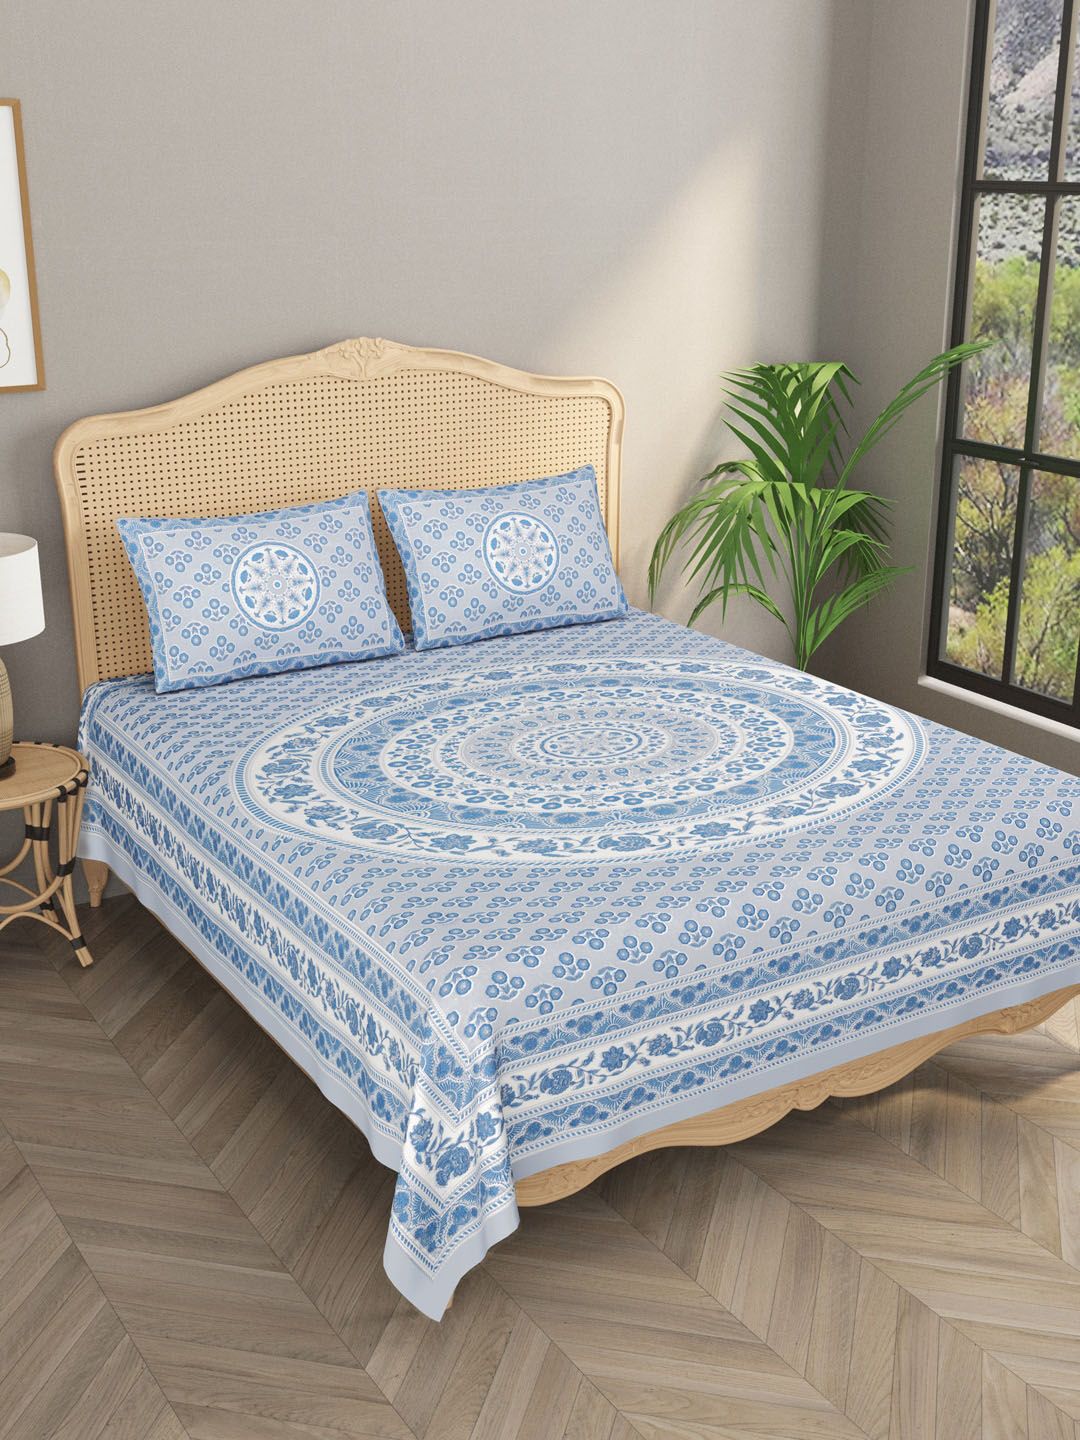 Gulaab Jaipur Blue & White 600 TC Cotton Double King Bedsheet With 2 Pillow Covers Price in India